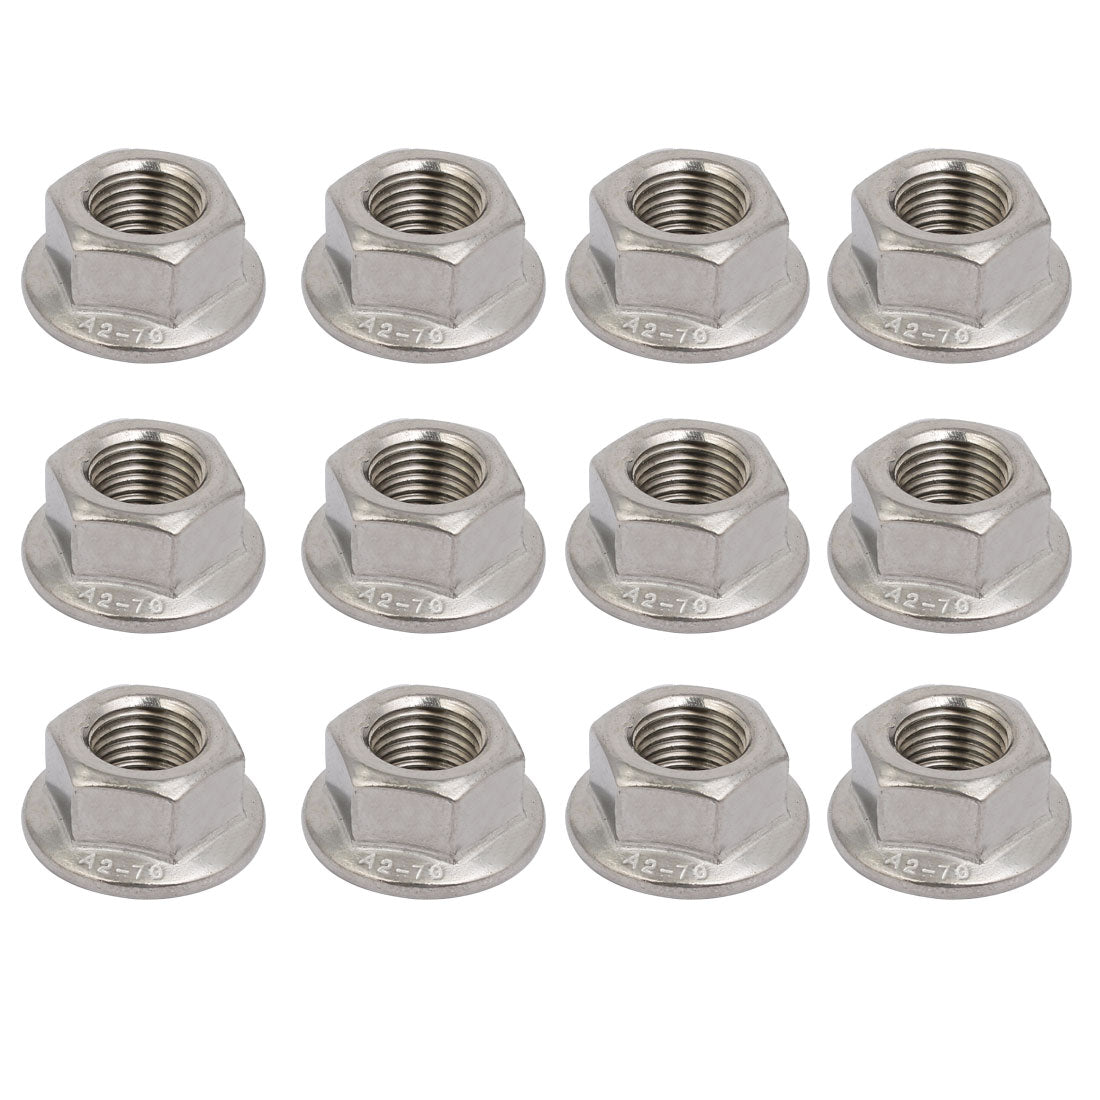 uxcell Uxcell 12pcs M12 x 1.25mm Pitch Metric Fine Thread 304 Stainless Steel Hex Flange Nut